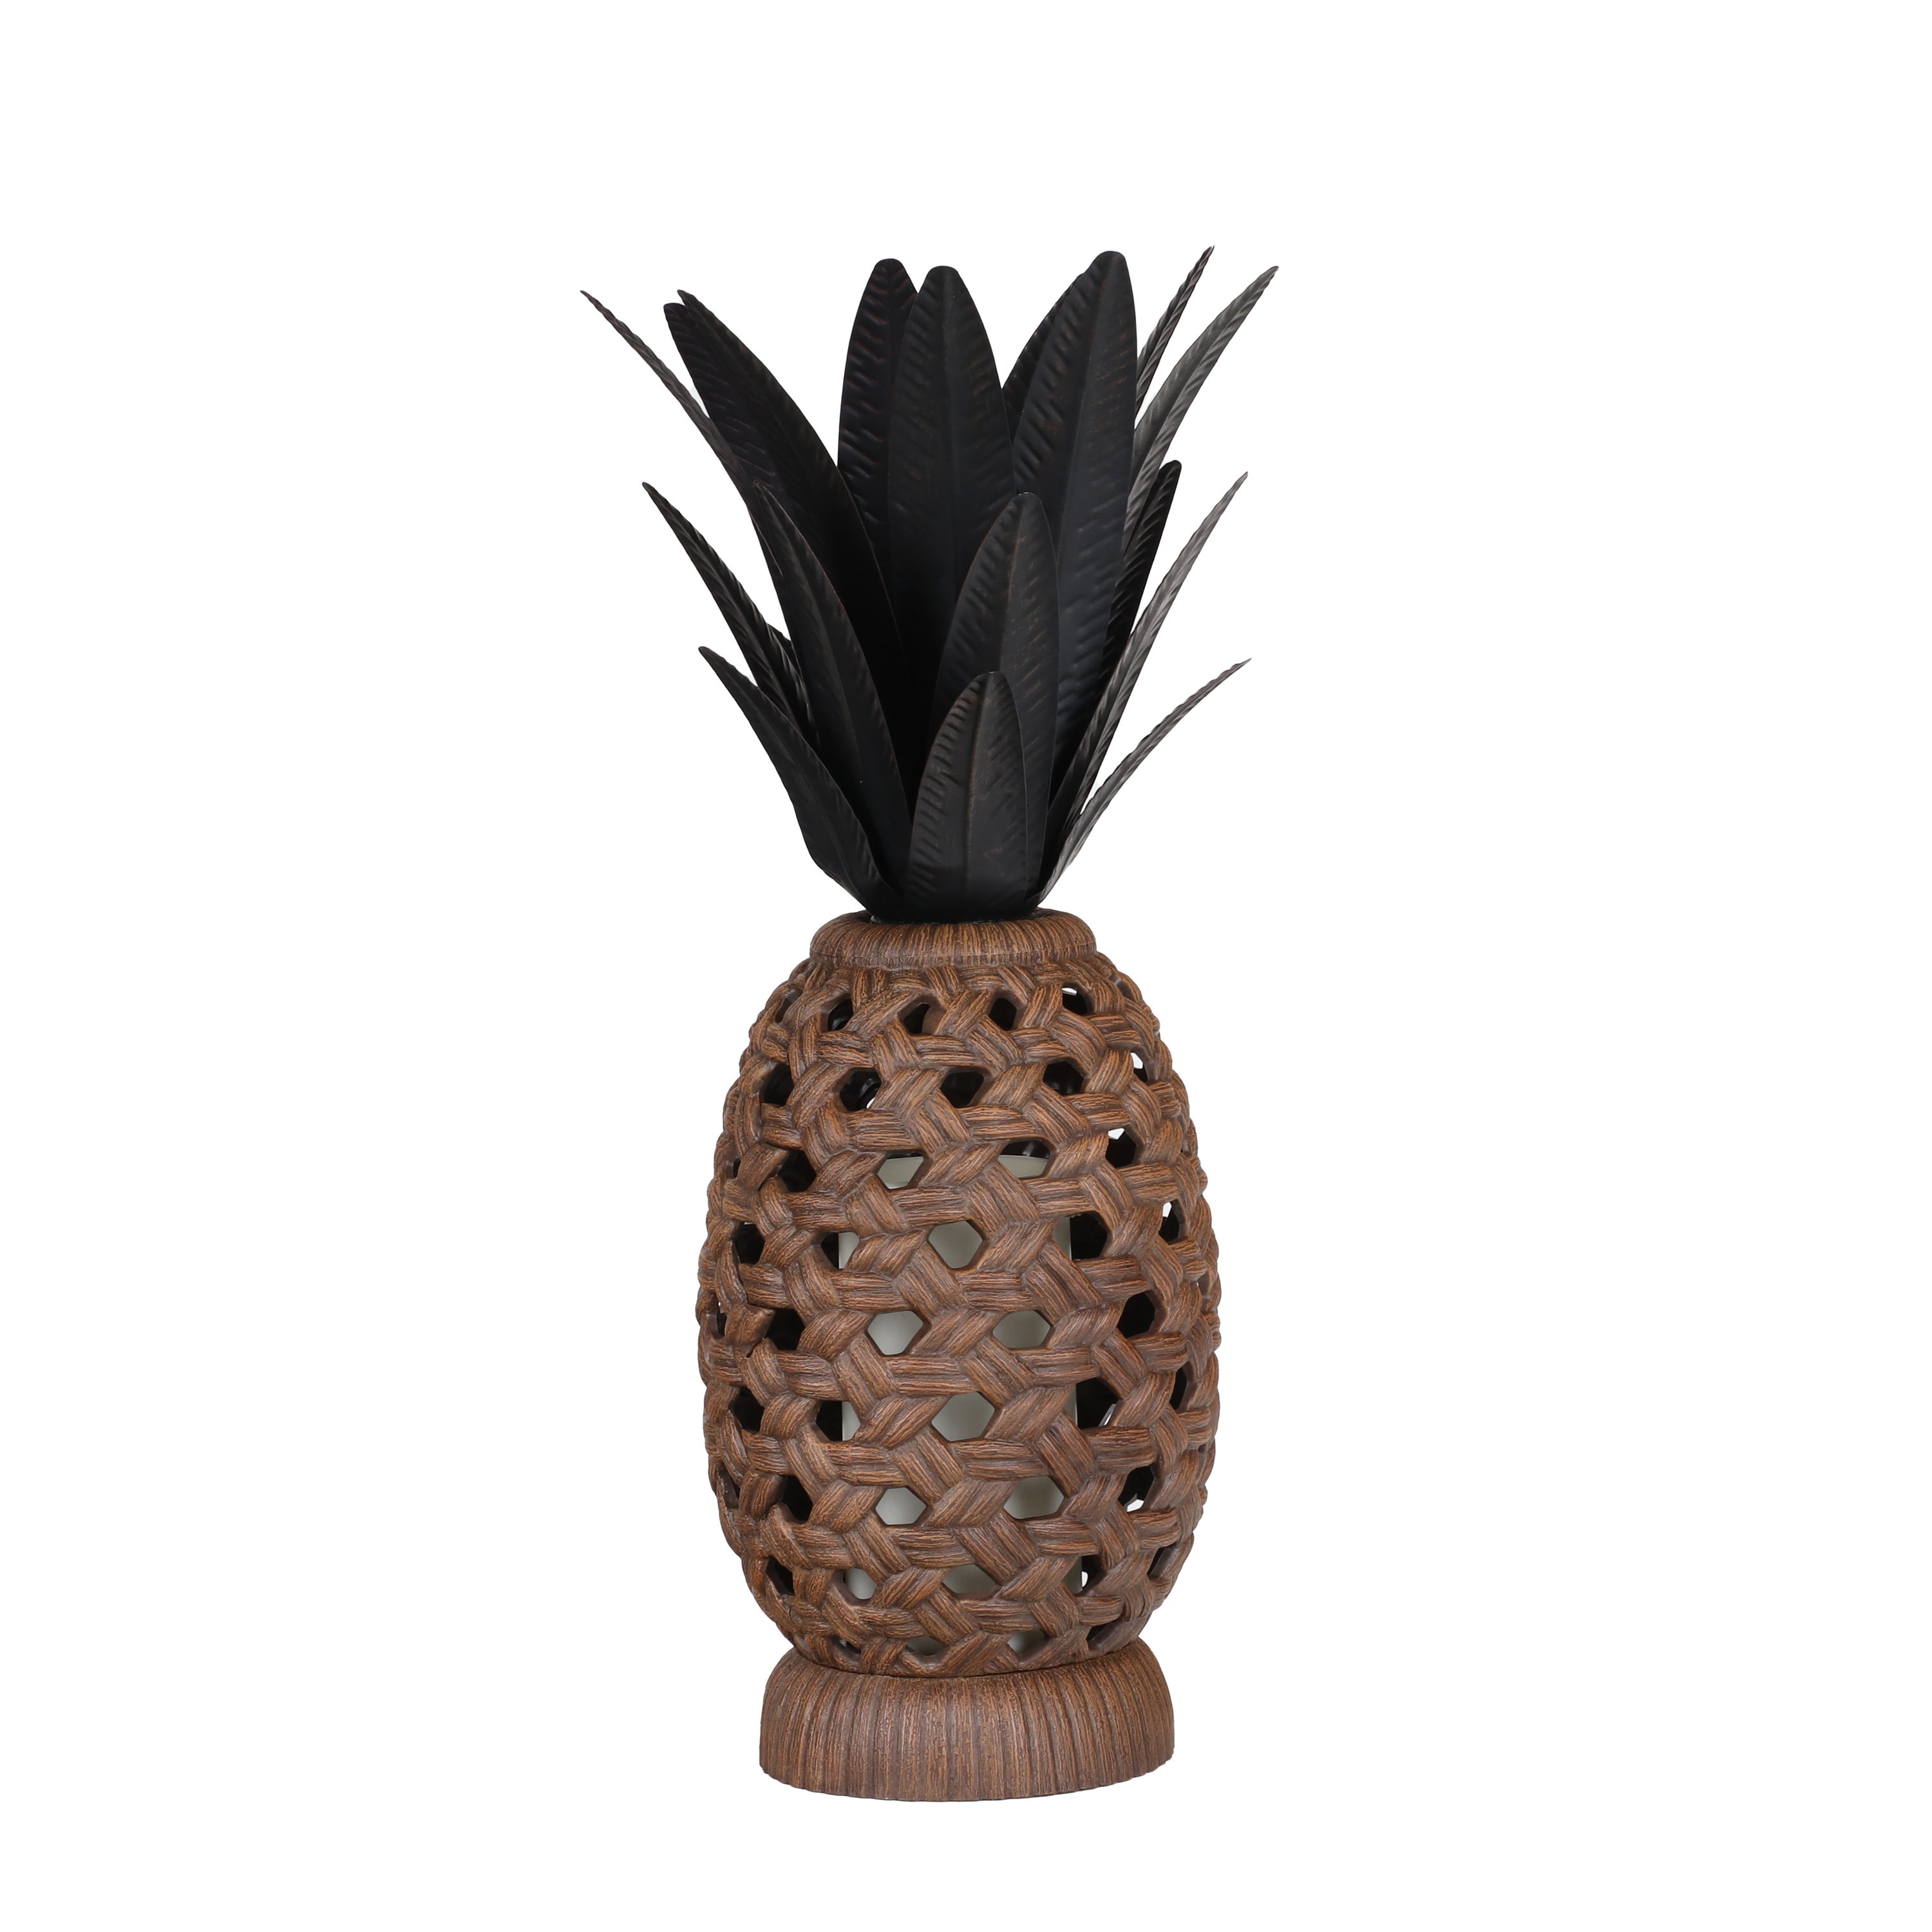 Selections 25-in H x 10-in W Bronze Pineapple Garden Statue in the department at Lowes.com